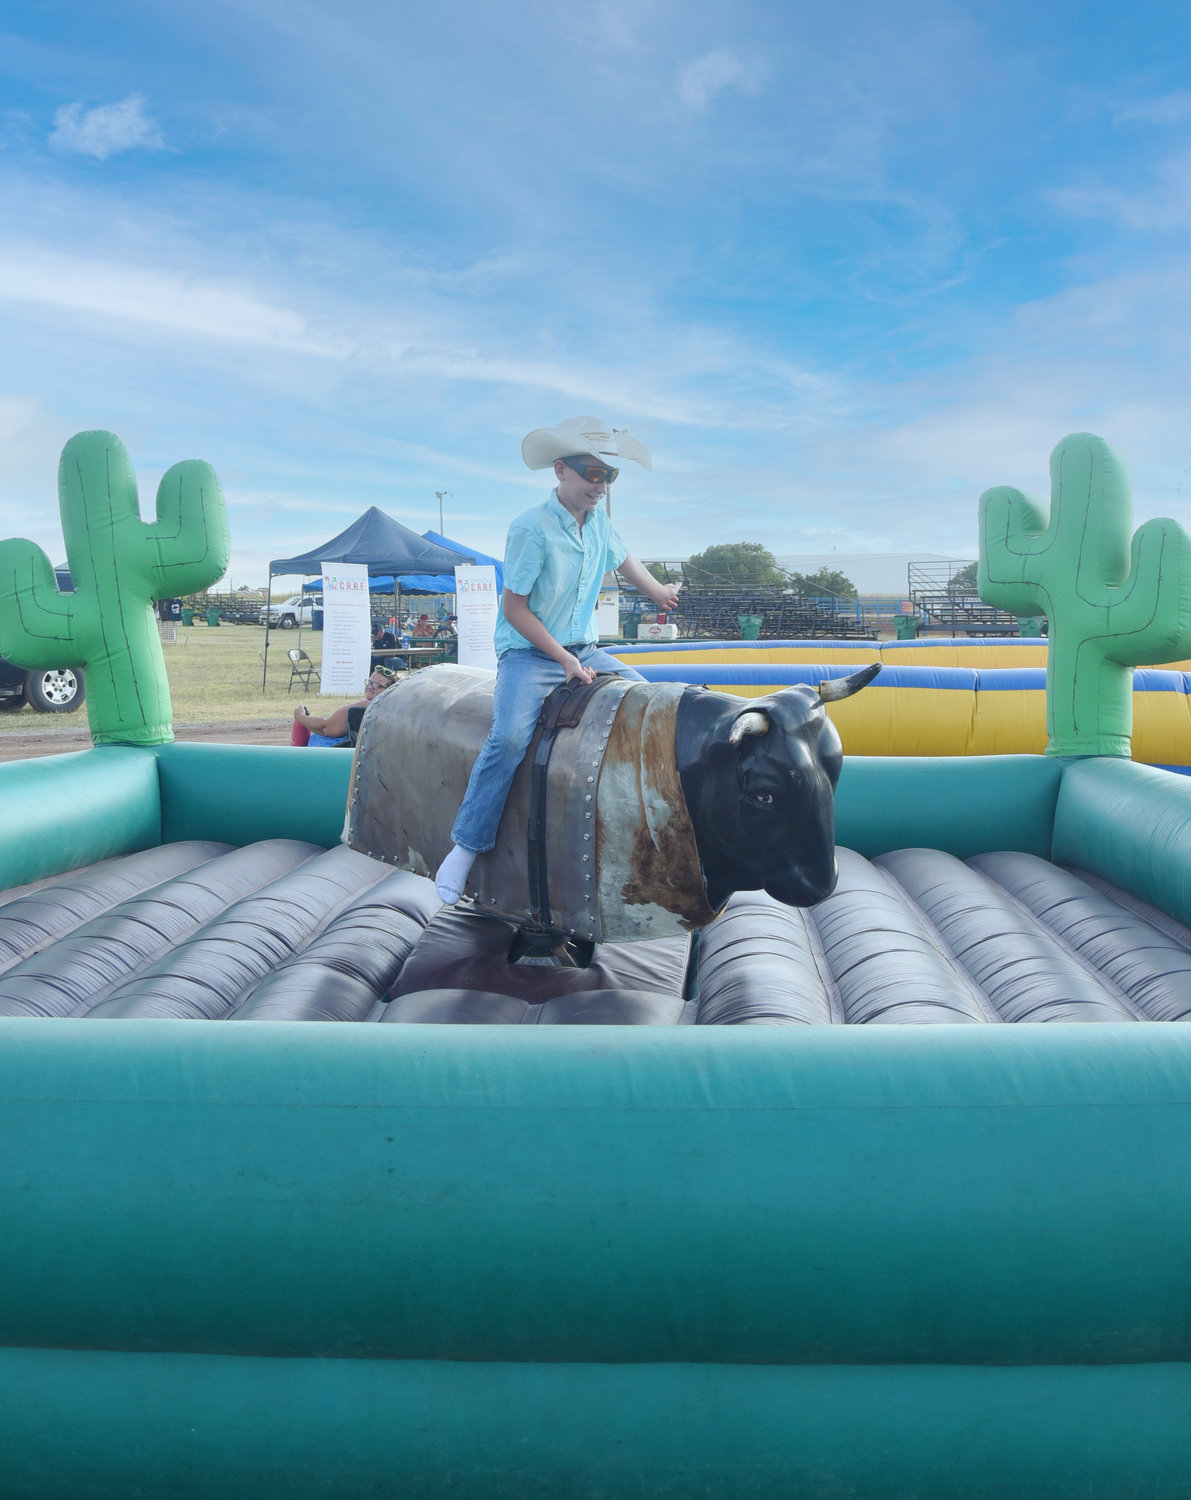 Layton Whitson tried his hand on a mechanical bull at the Operation C.A.R.E. fundraiser rodeo held Aug. 5 and Aug. 6, 2022.